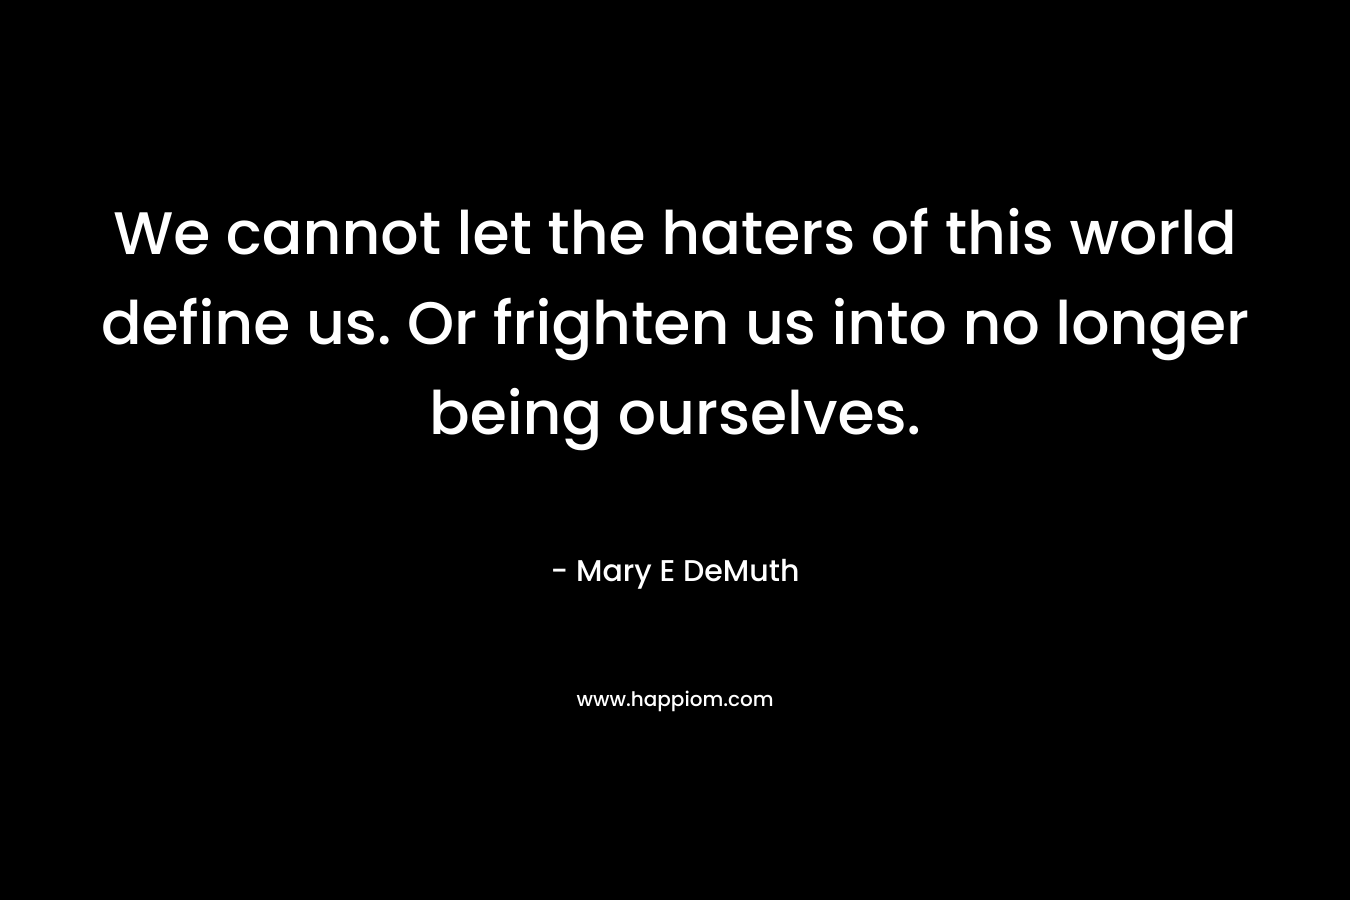 We cannot let the haters of this world define us. Or frighten us into no longer being ourselves. – Mary E DeMuth